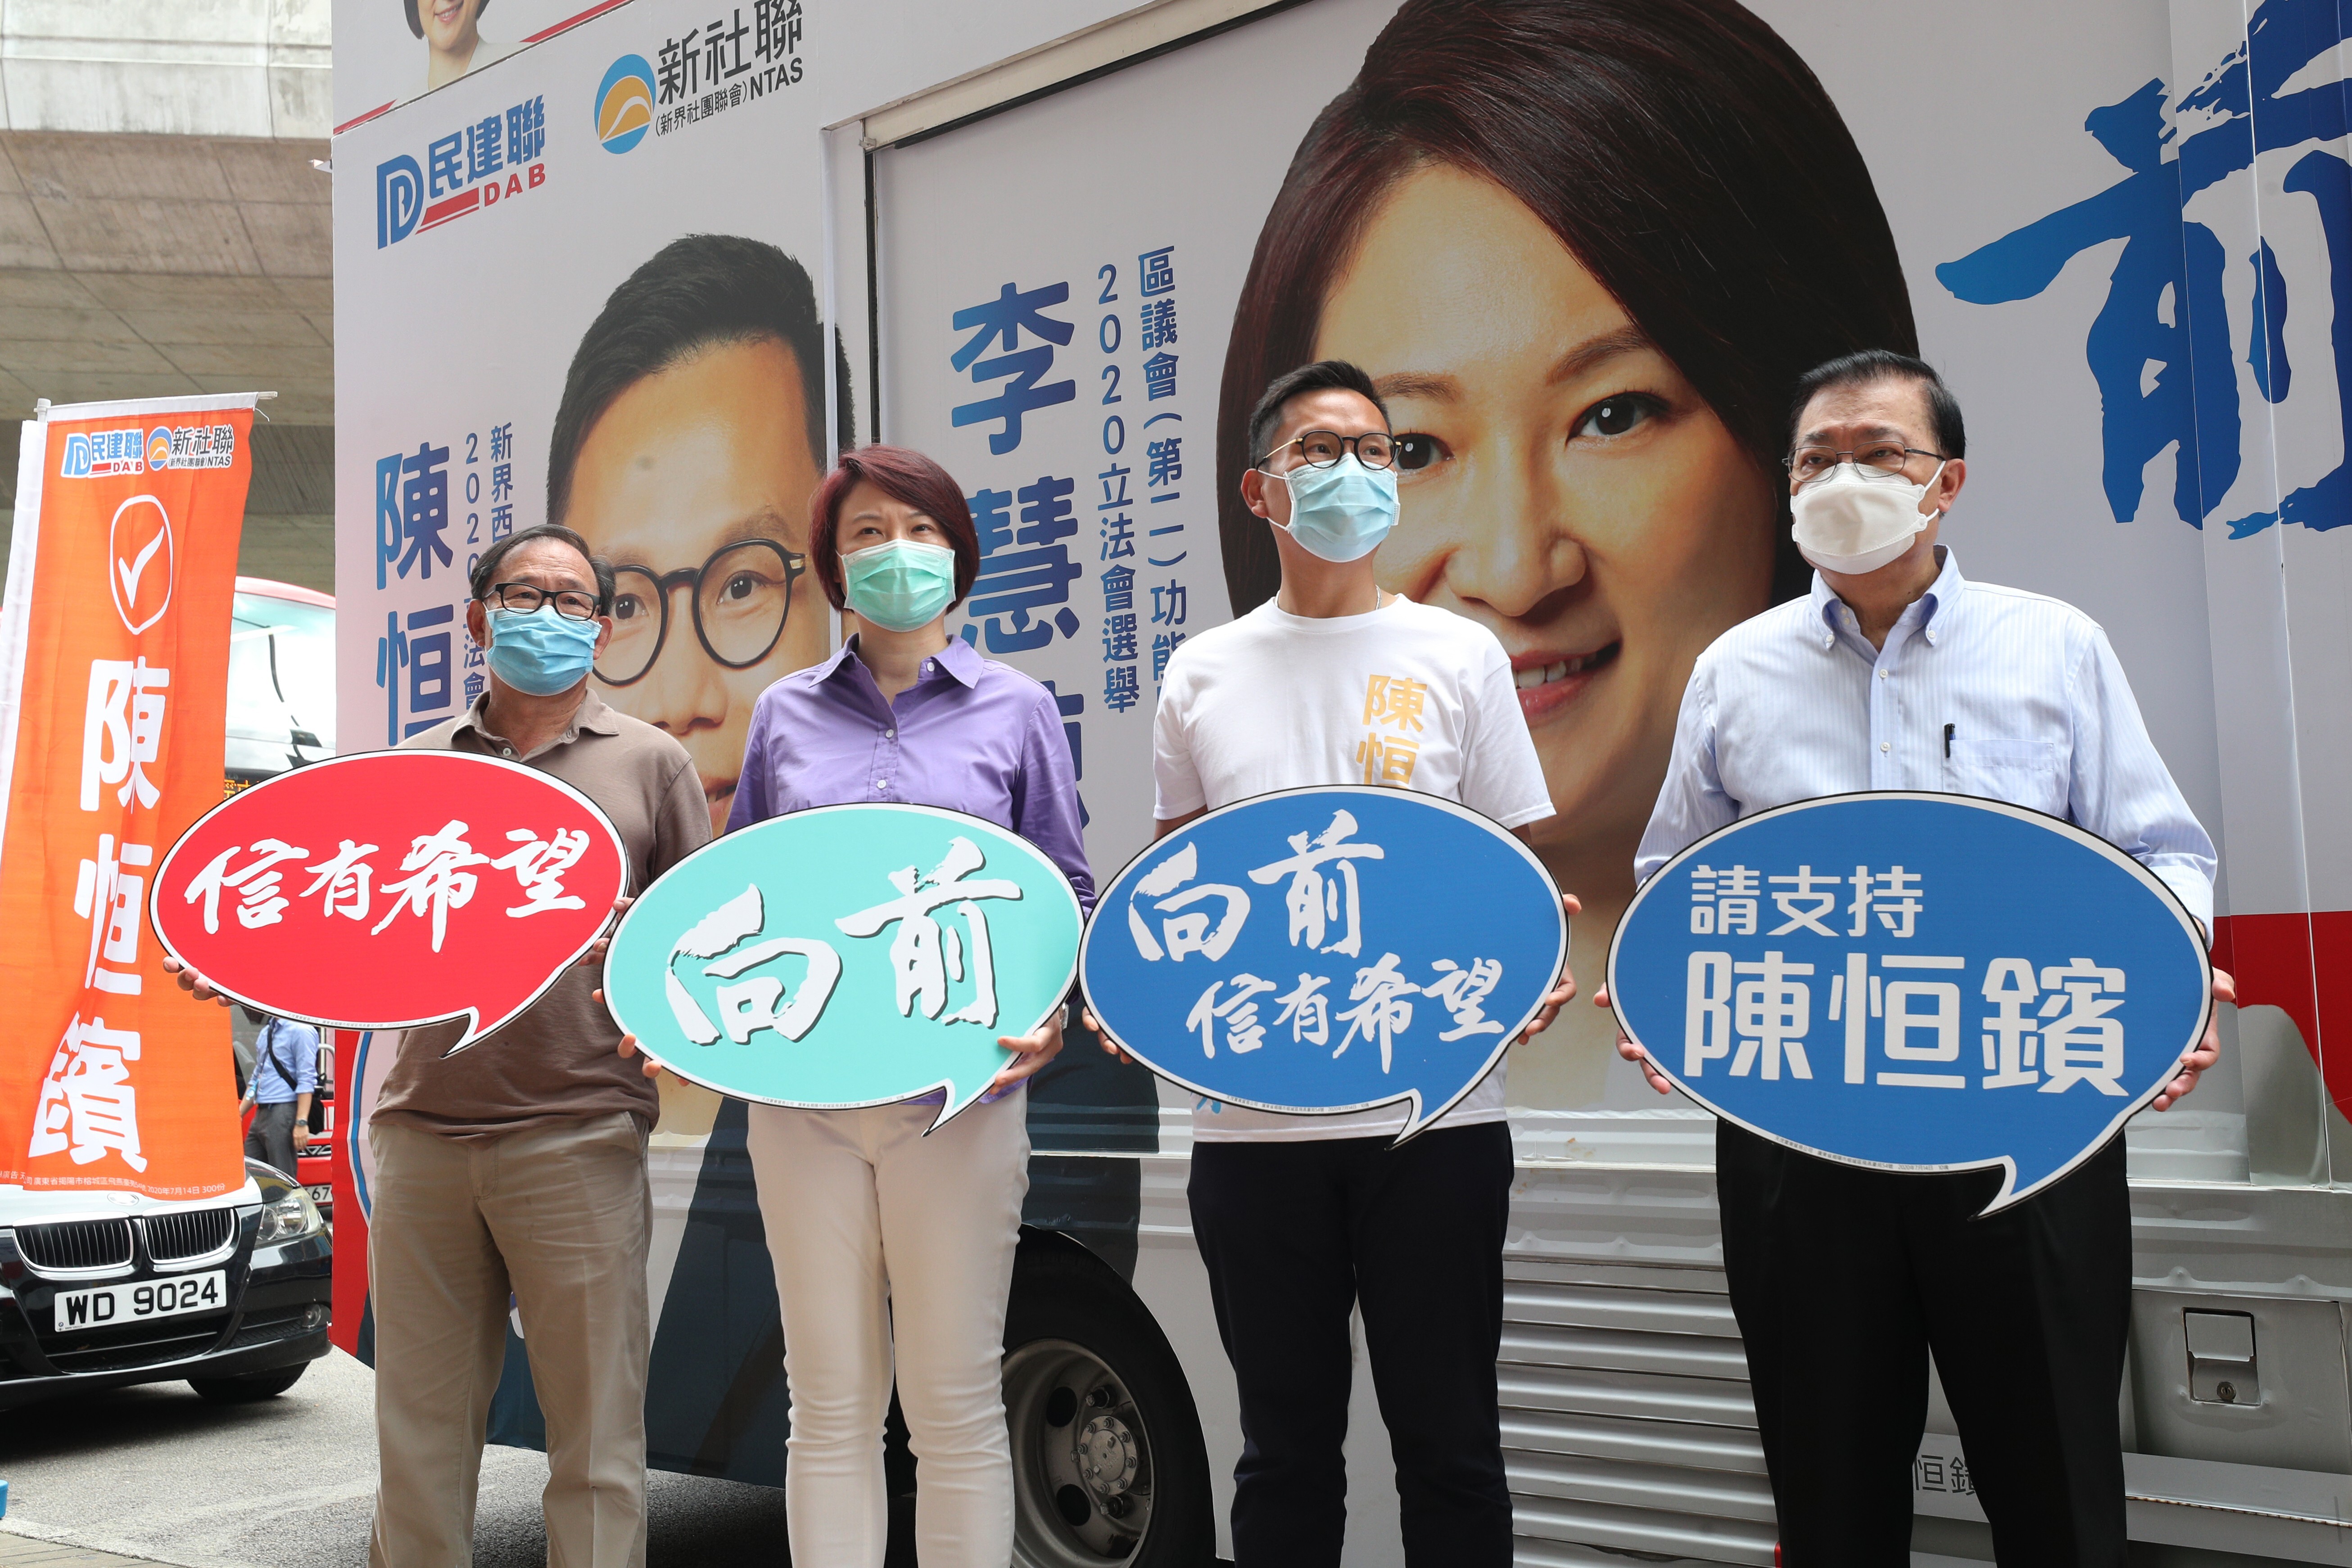 Lawmakers Leung Che-cheung (left), Starry Lee Wai-king and Ben Chan Han-pan, and Tam Yiu-chung pose next to campaign banners. Photo: Handout